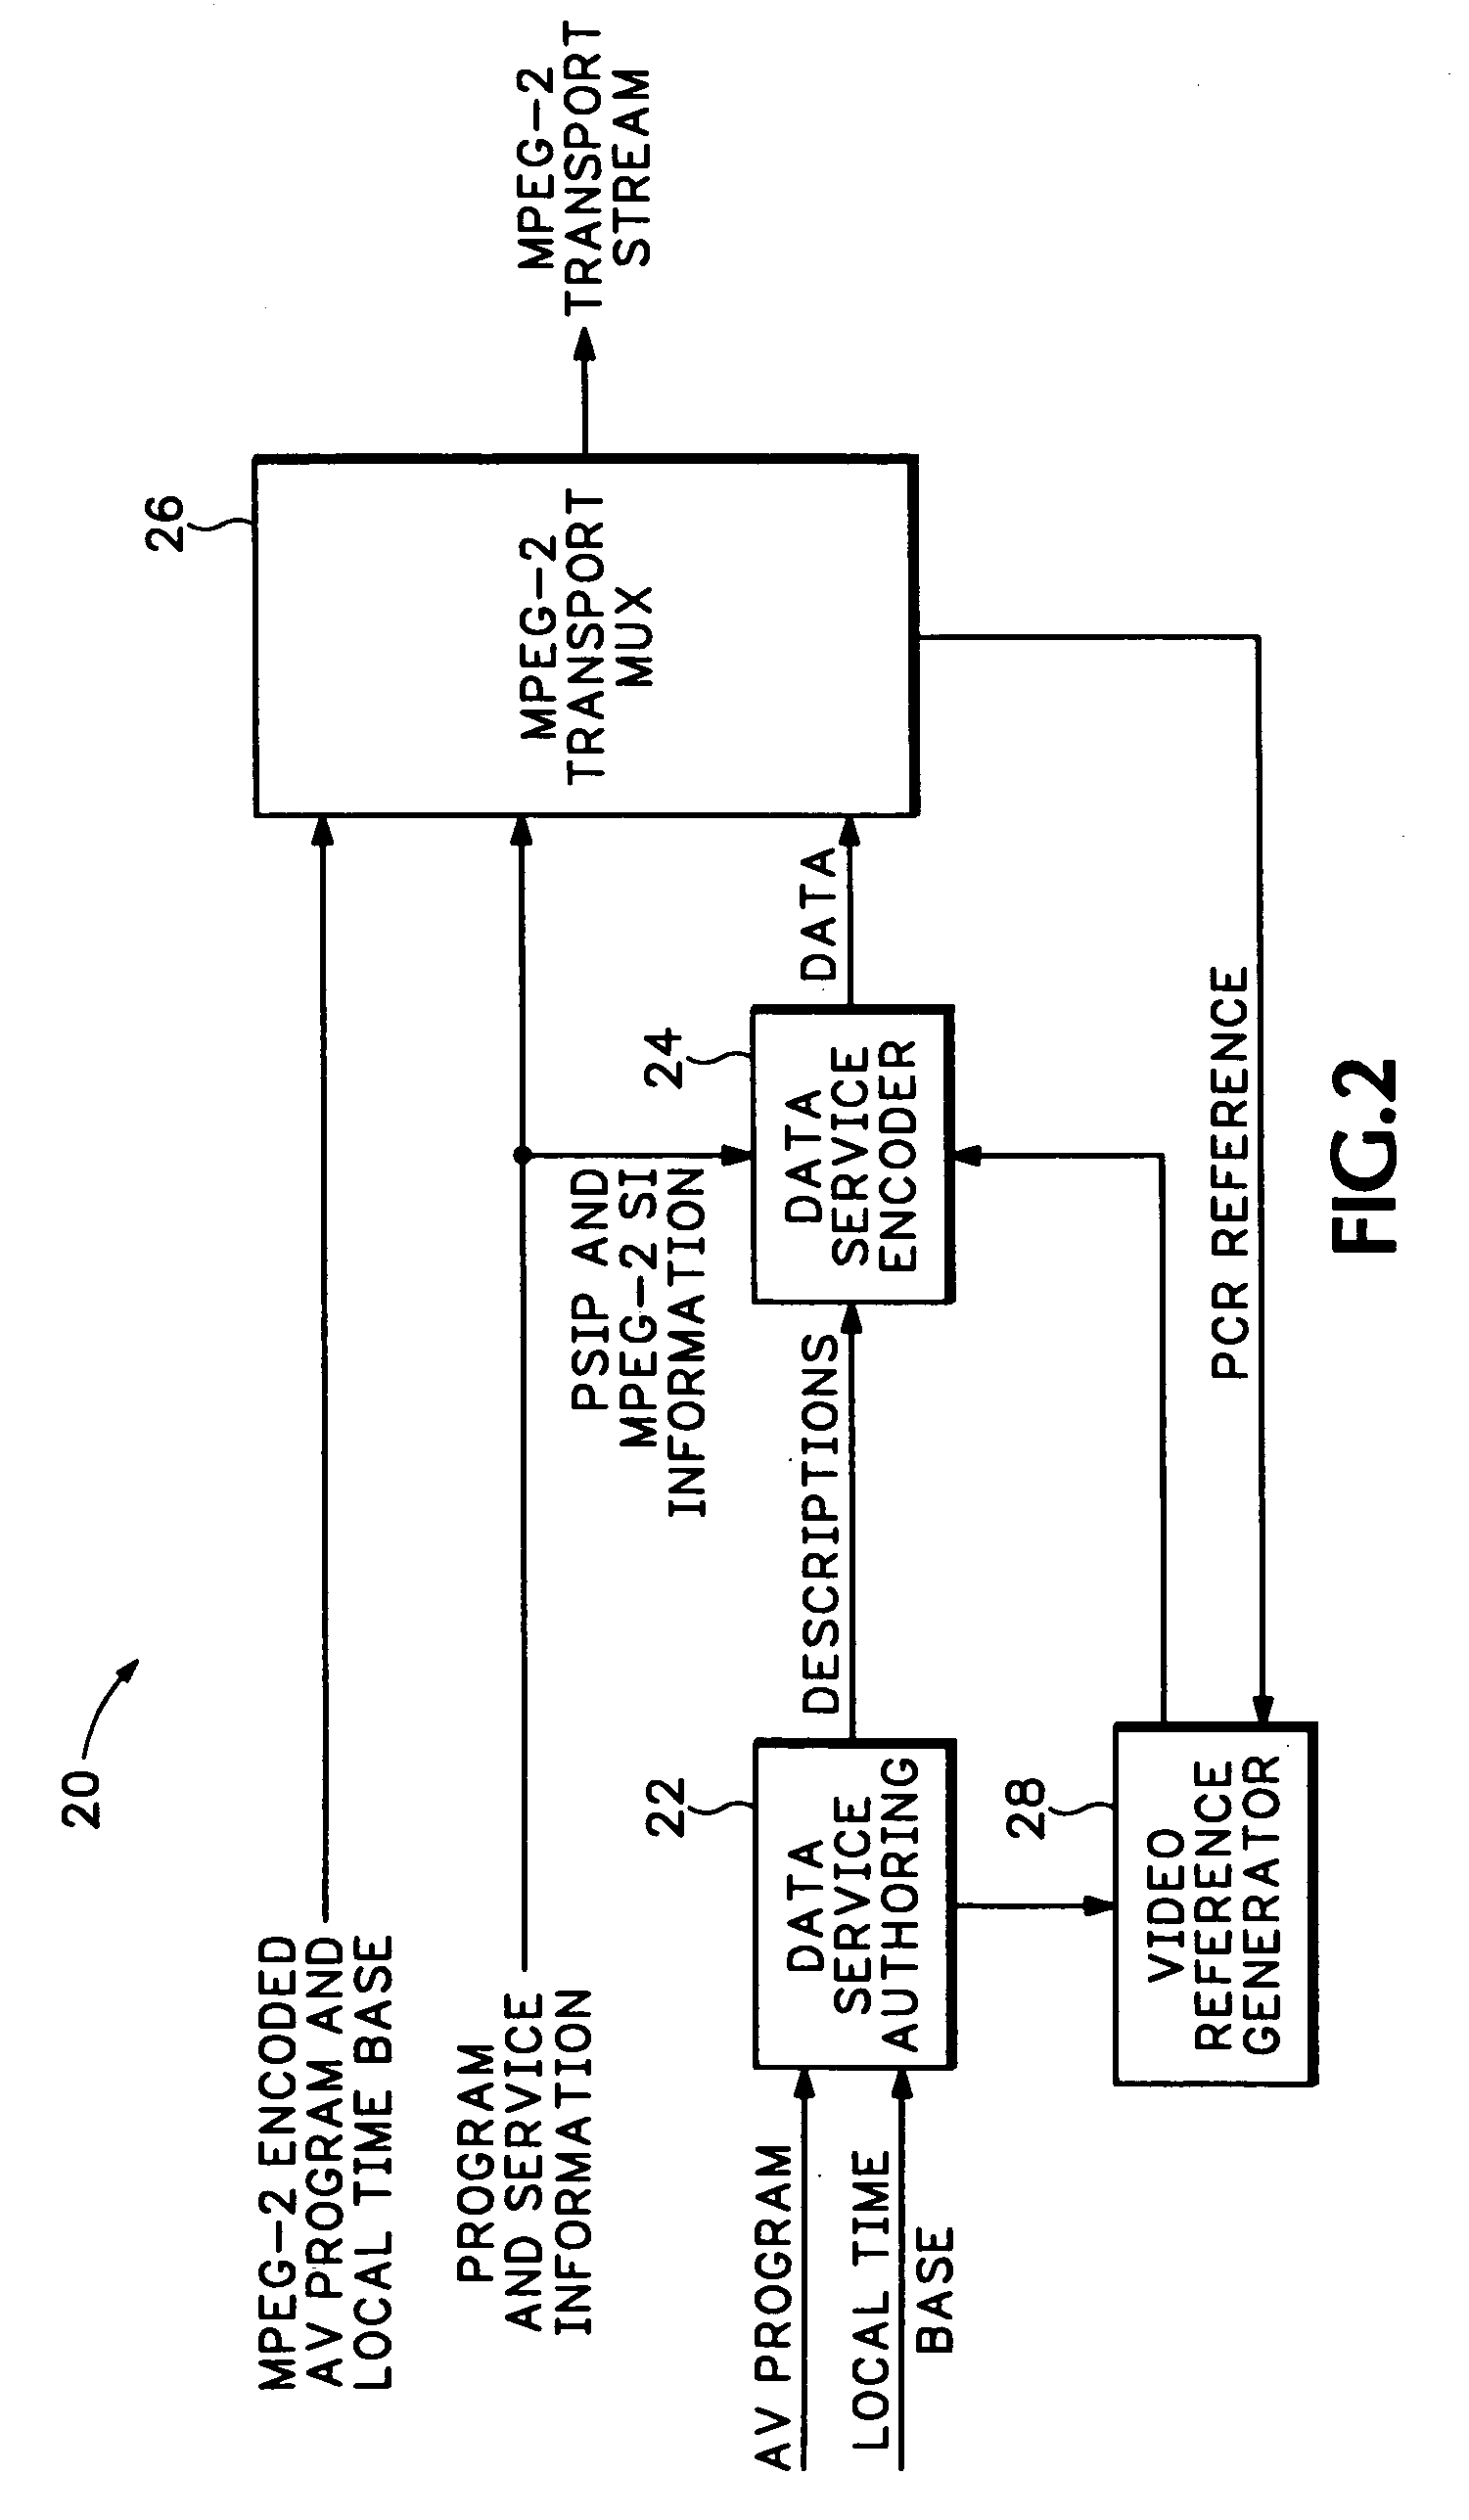 DTV data service application and receiver mechanism